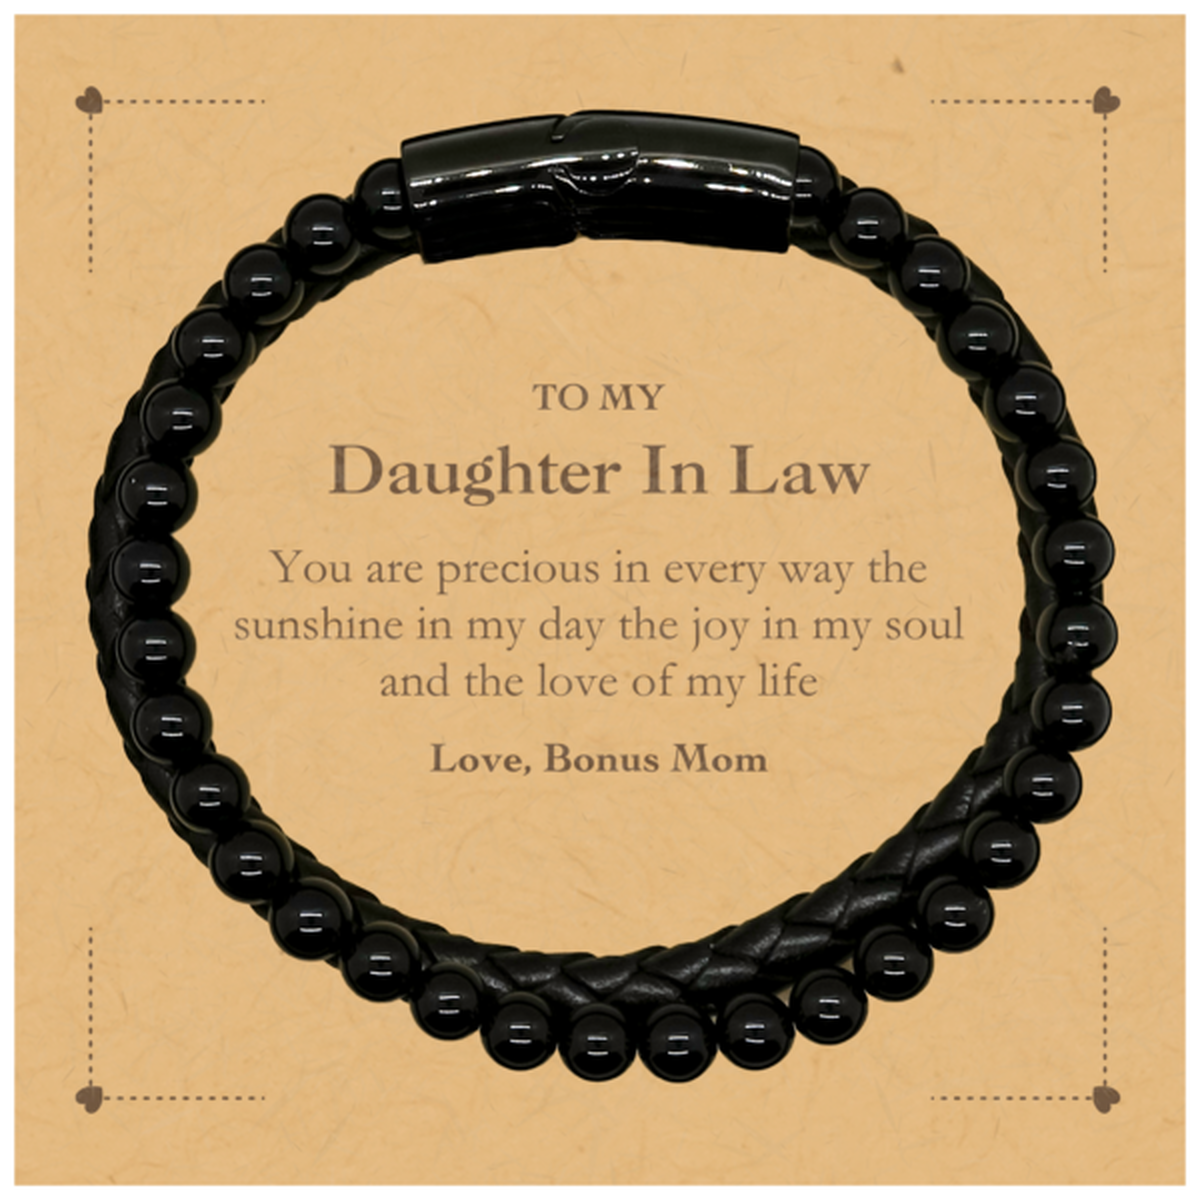 Graduation Gifts for Daughter In Law Stone Leather Bracelets Present from Bonus Mom, Christmas Daughter In Law Birthday Gifts Daughter In Law You are precious in every way the sunshine in my day. Love, Bonus Mom